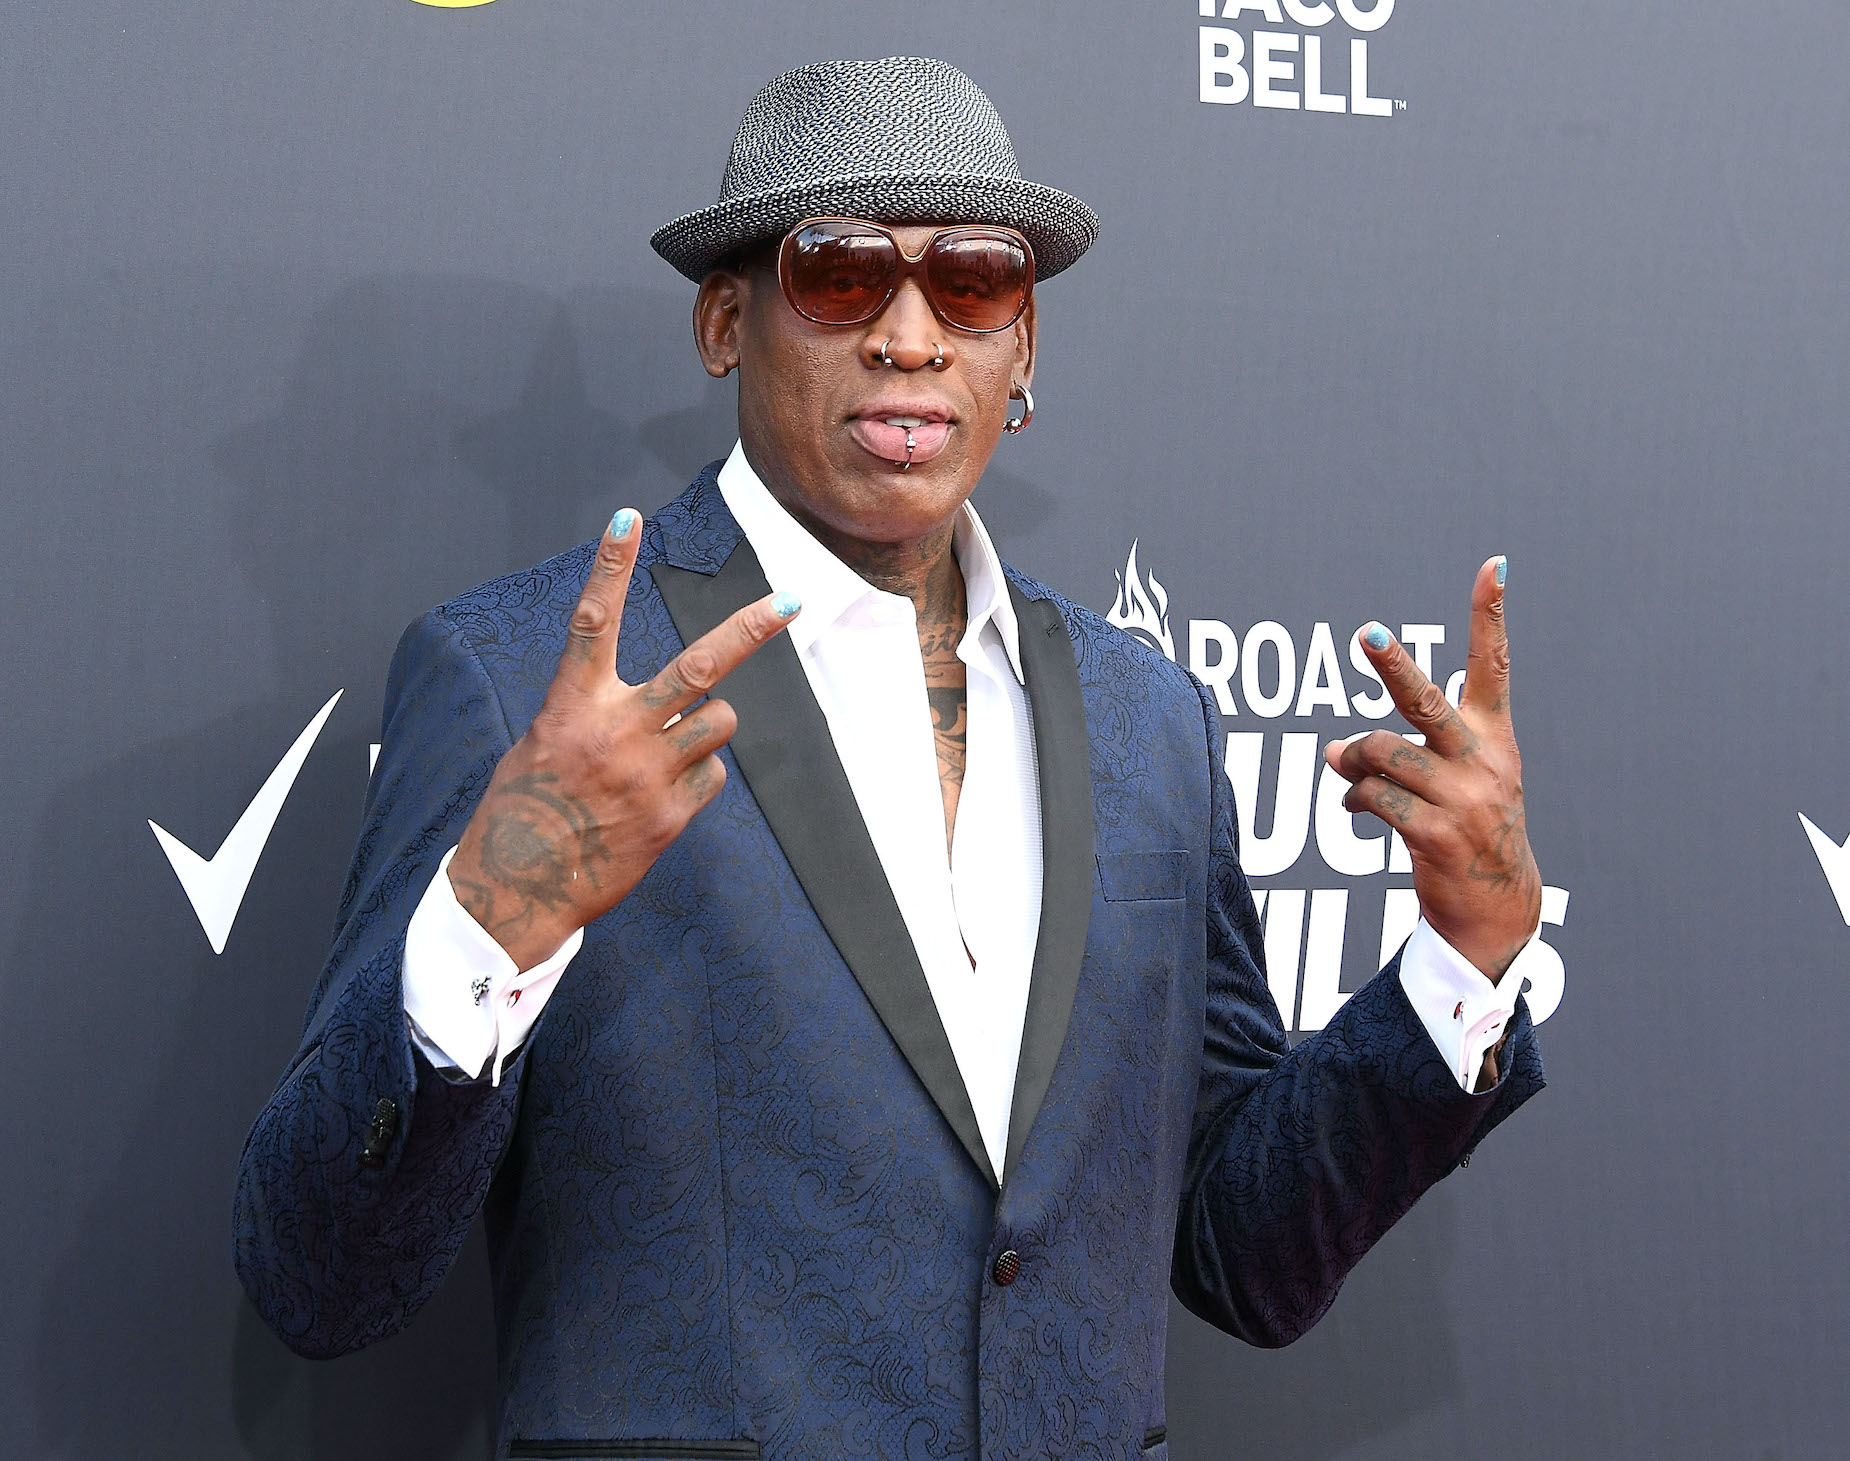 Dennis Rodman had a colorful career, both on and off the basketball court.